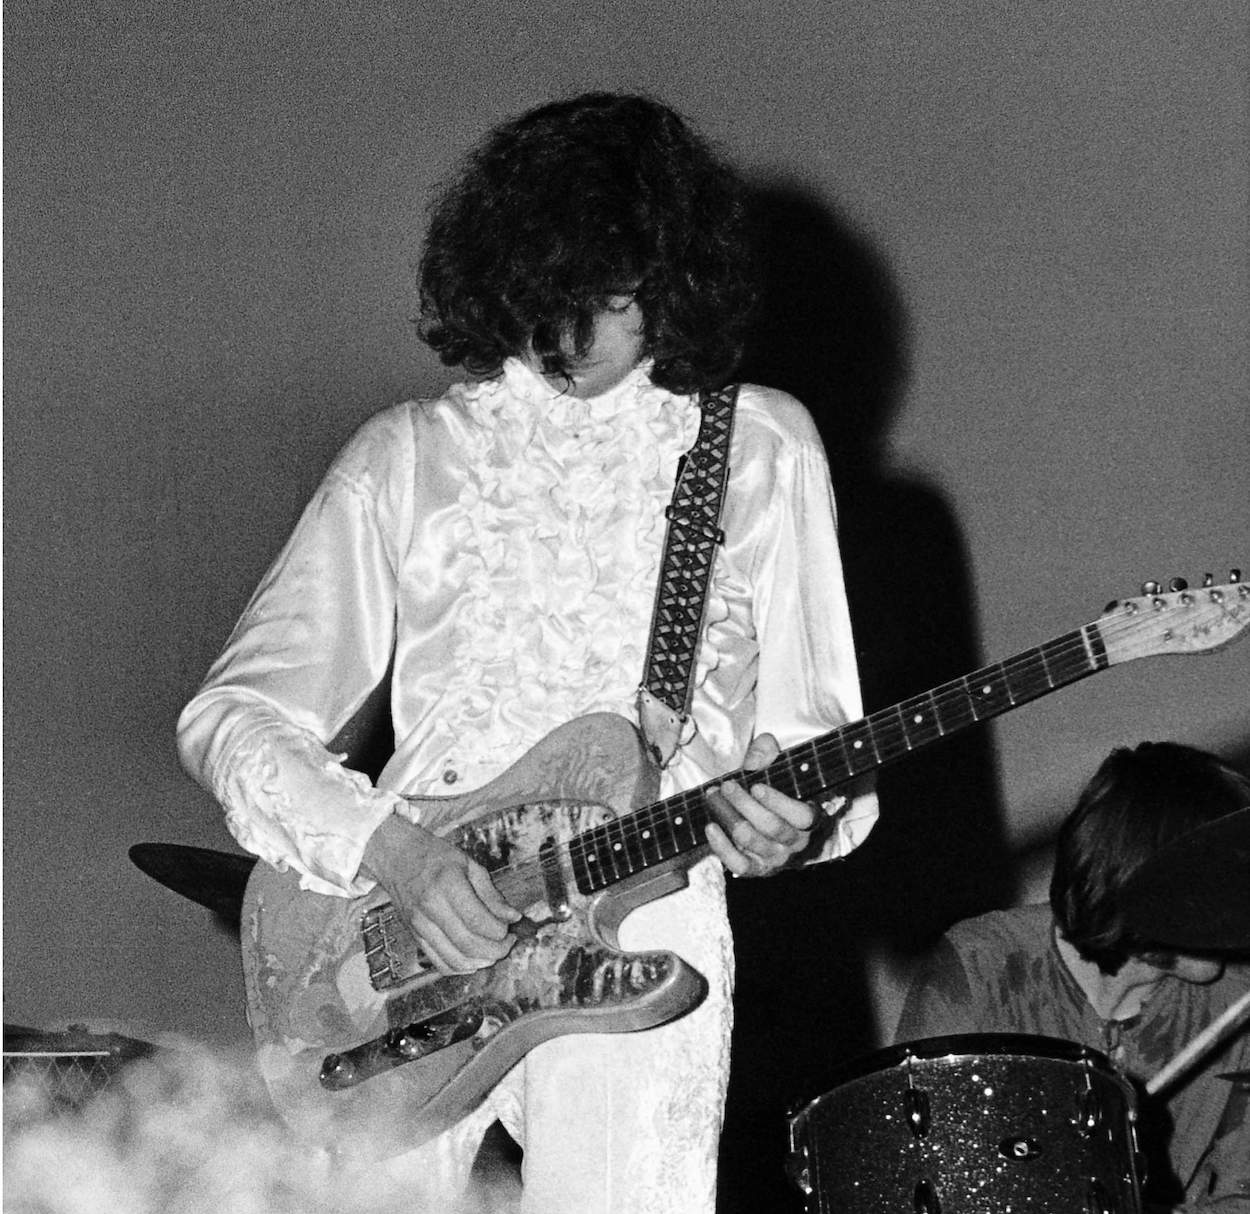 Jimmy Page plays a Fender Telecaster during a 1968 concert. Page received his first famous guitar when he turned down an invitation to join the Yardbirds a second time.